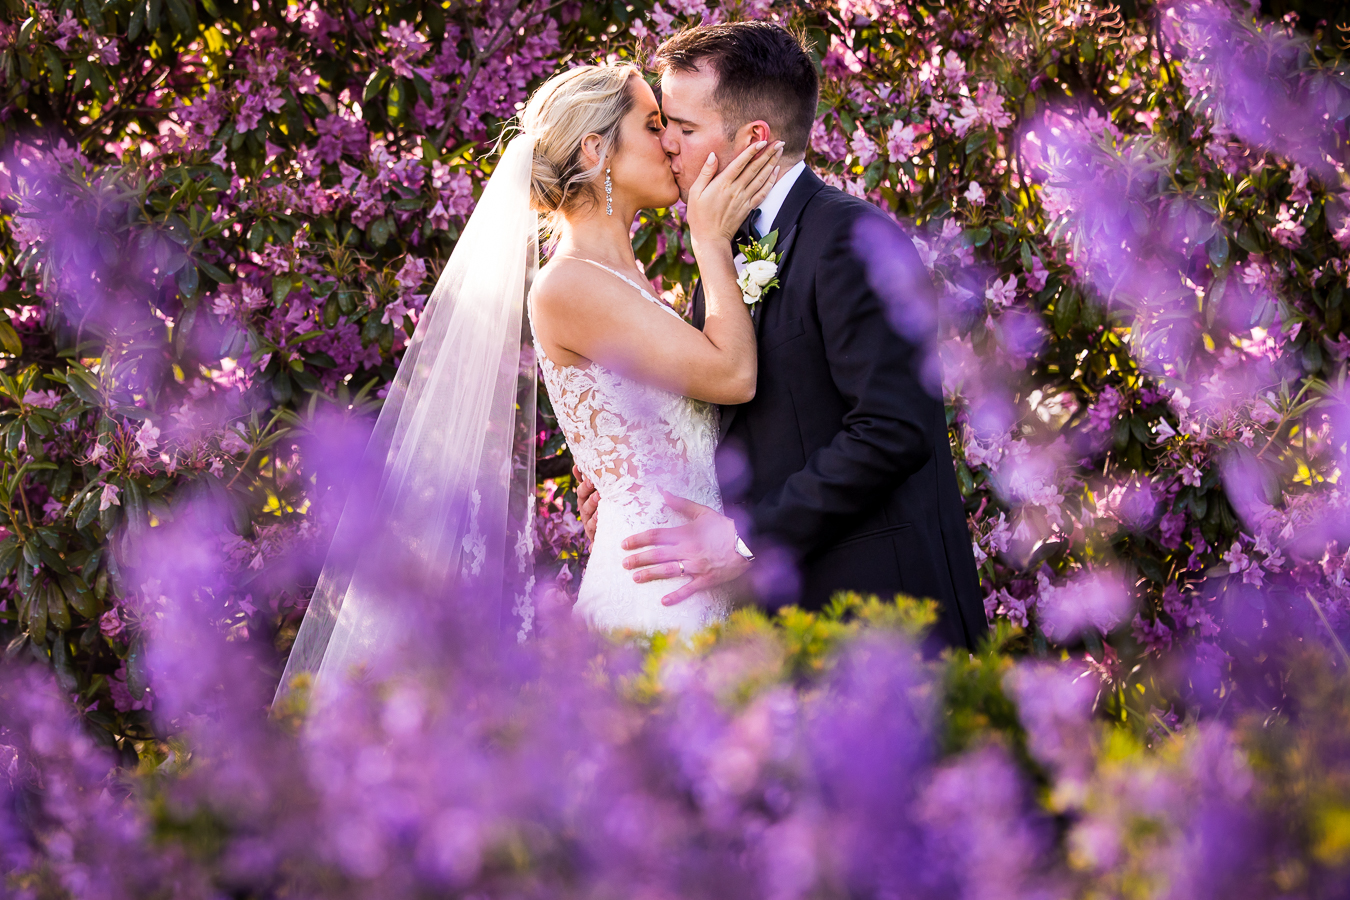 Country Club of York Wedding photographer, lisa rhinehart, captures this creative, vibrant and colorful image of the bride and groom as they kiss during their wedding portraits